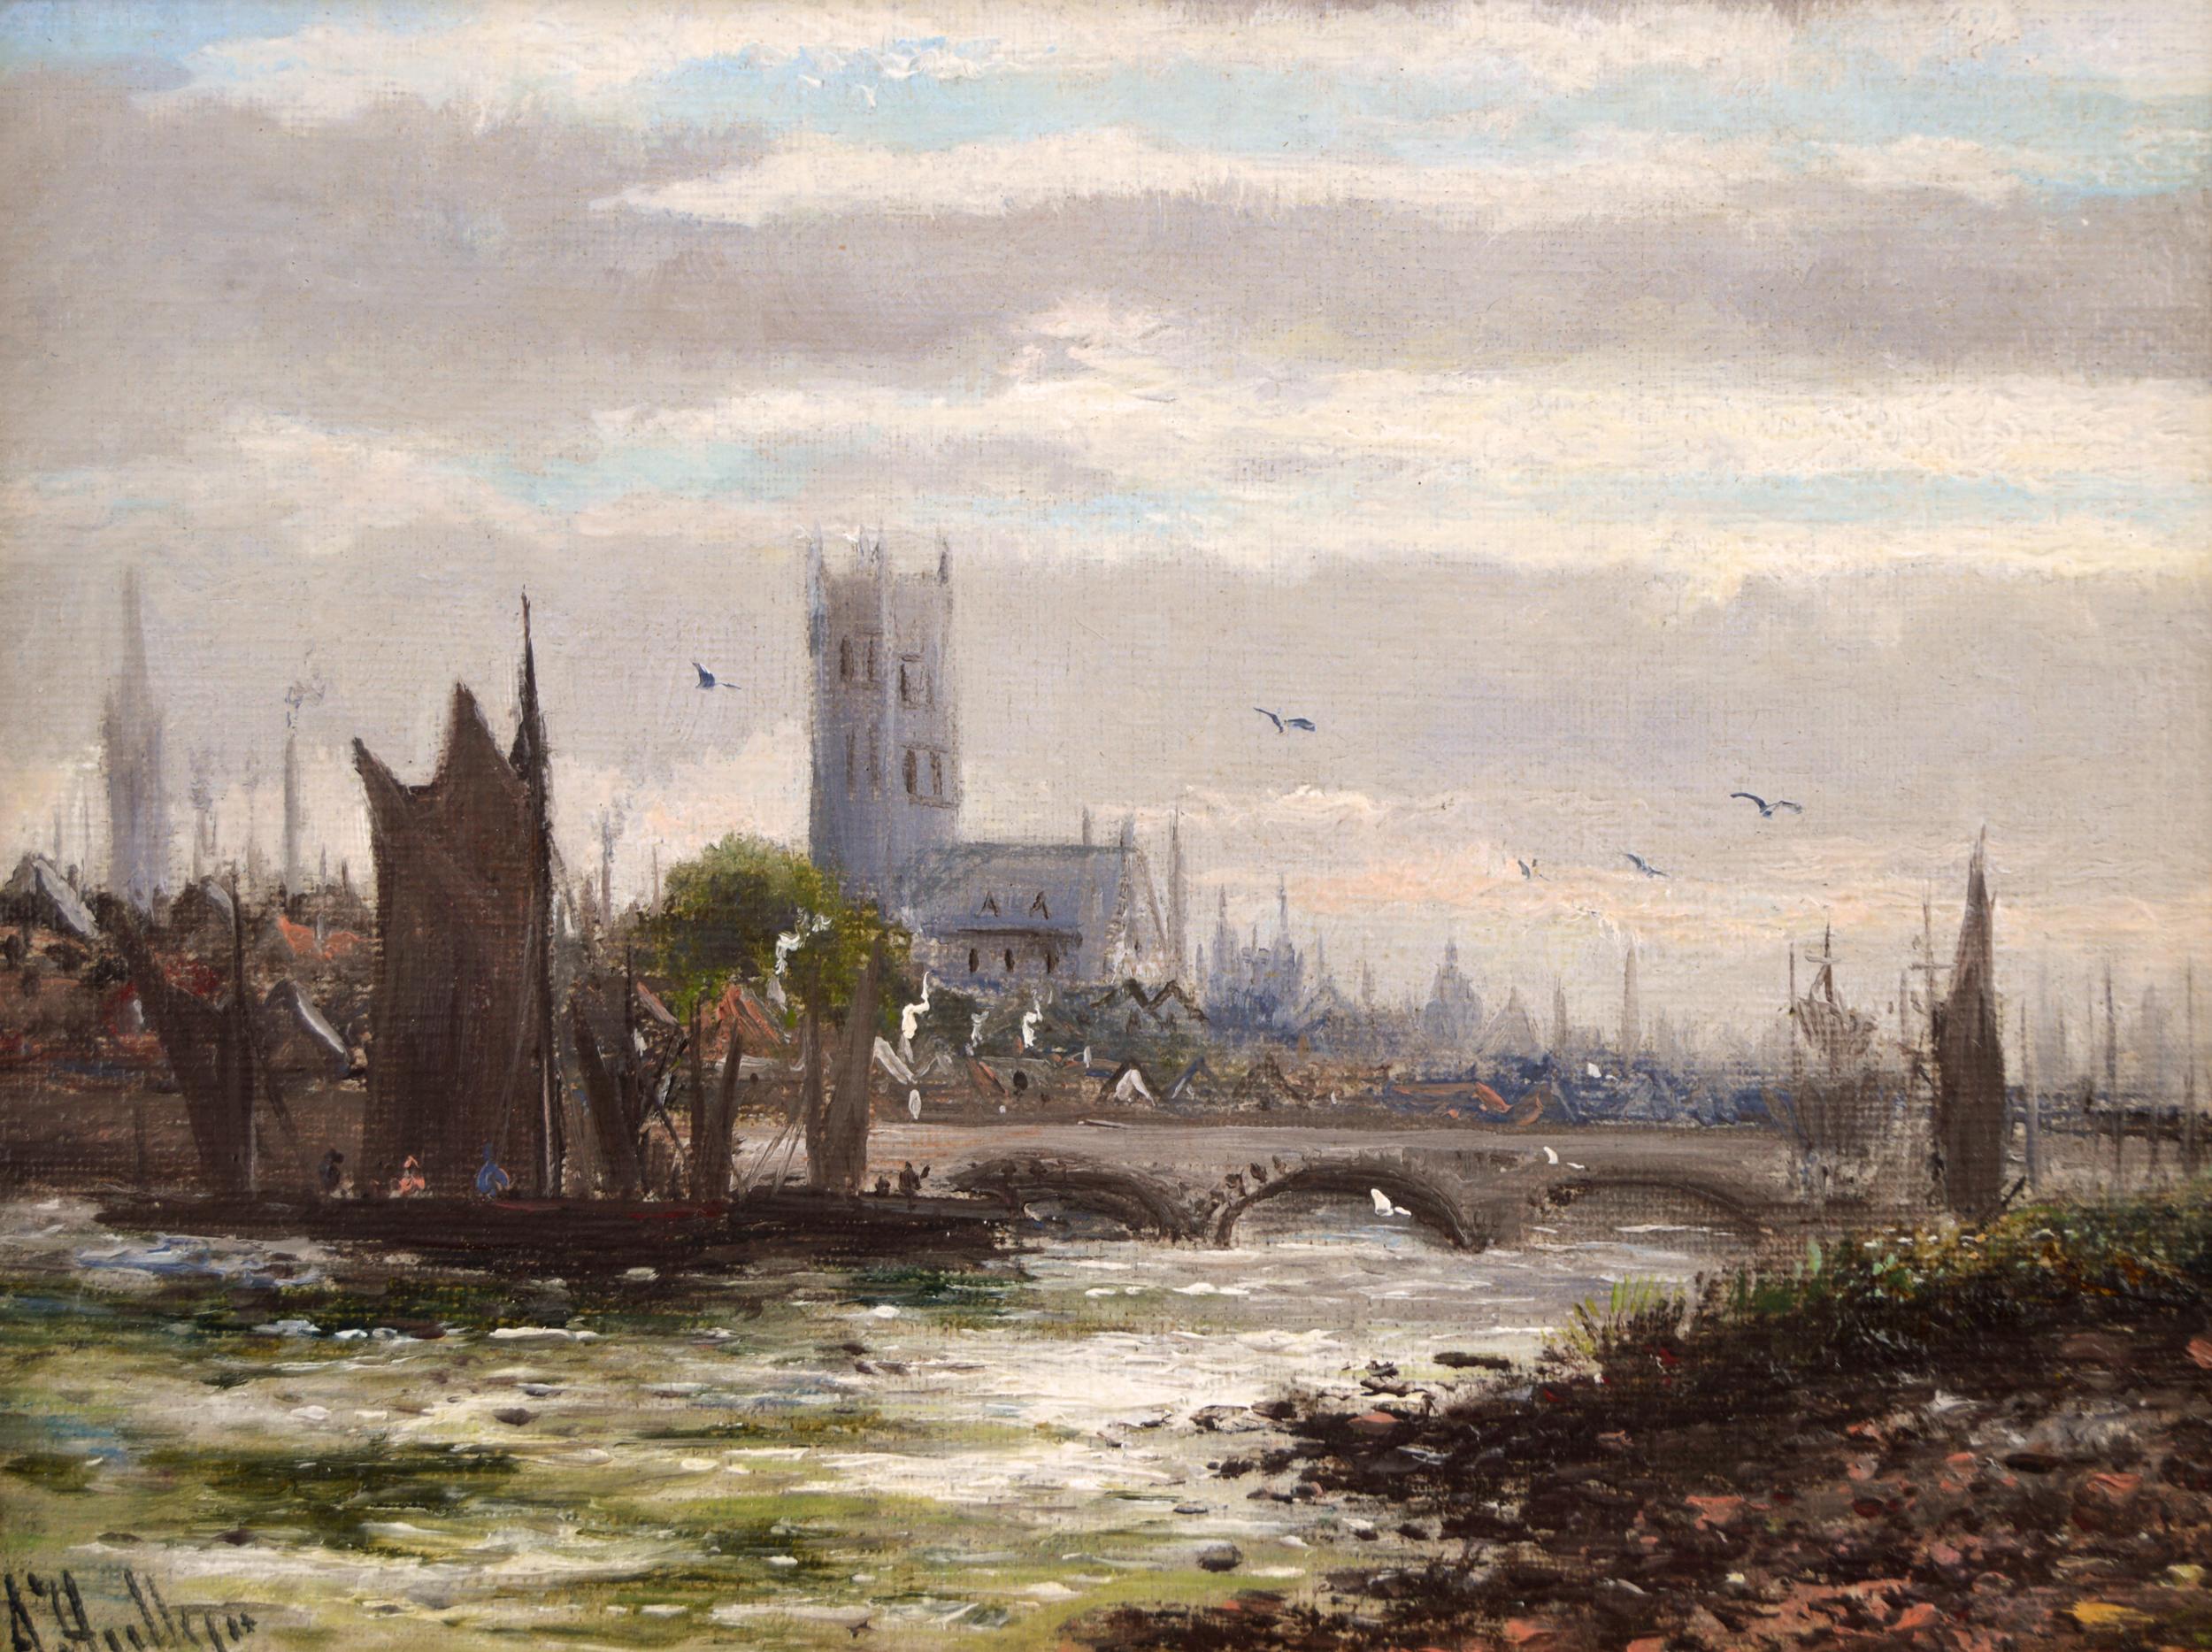 Pair of 19th century landscape oil paintings of the Thames - Painting by Abraham Hulk the Younger